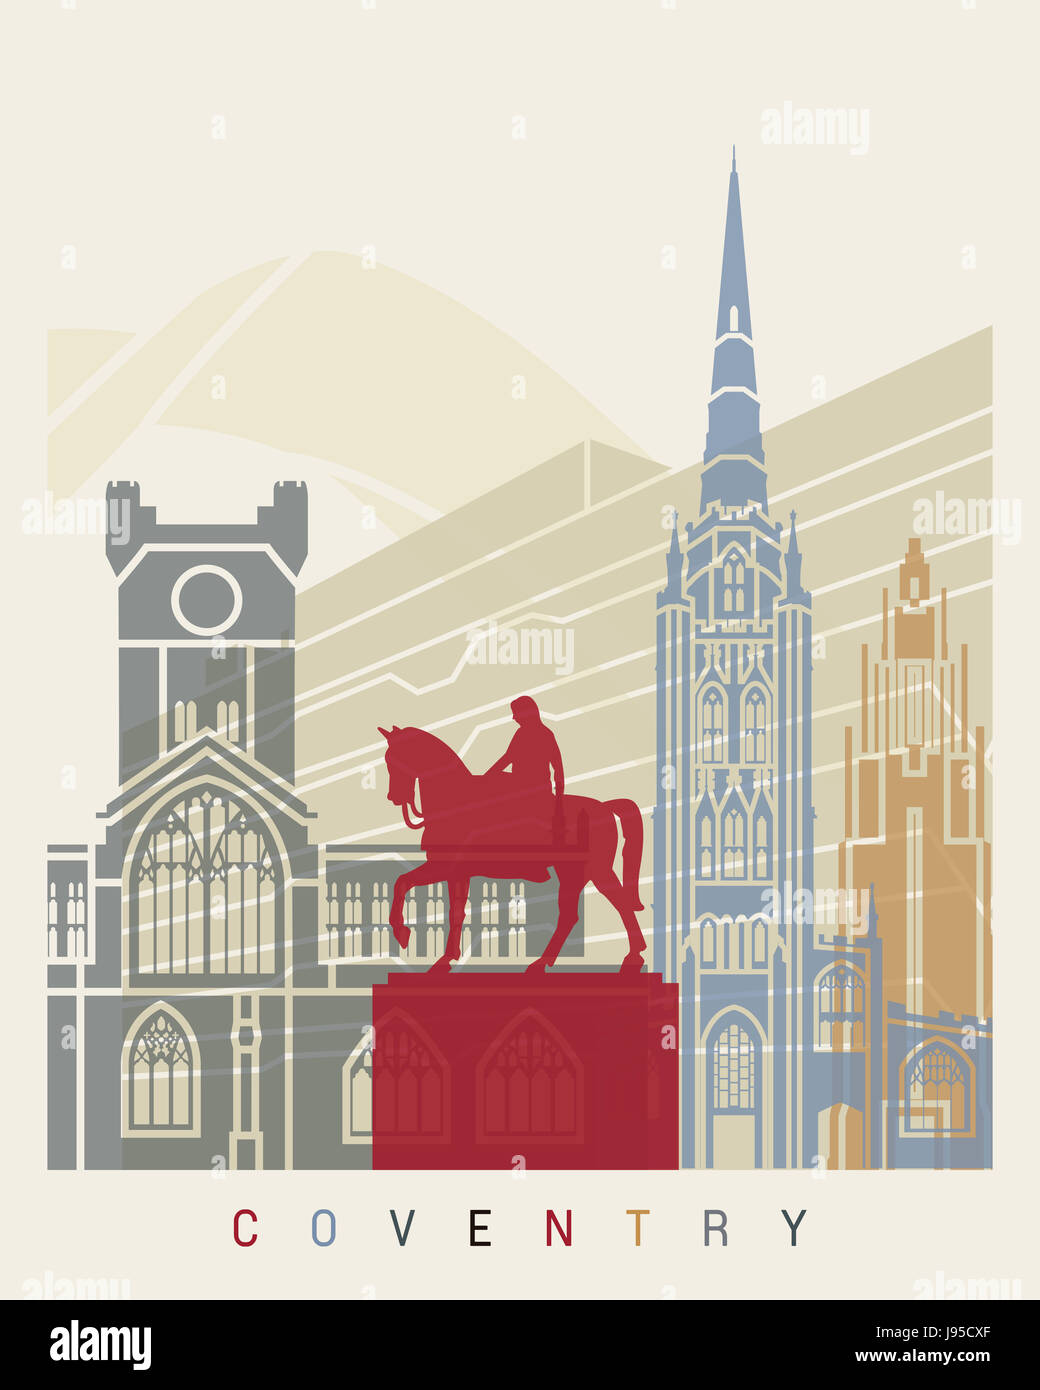 Coventry skyline poster in editable vector file Stock Photo